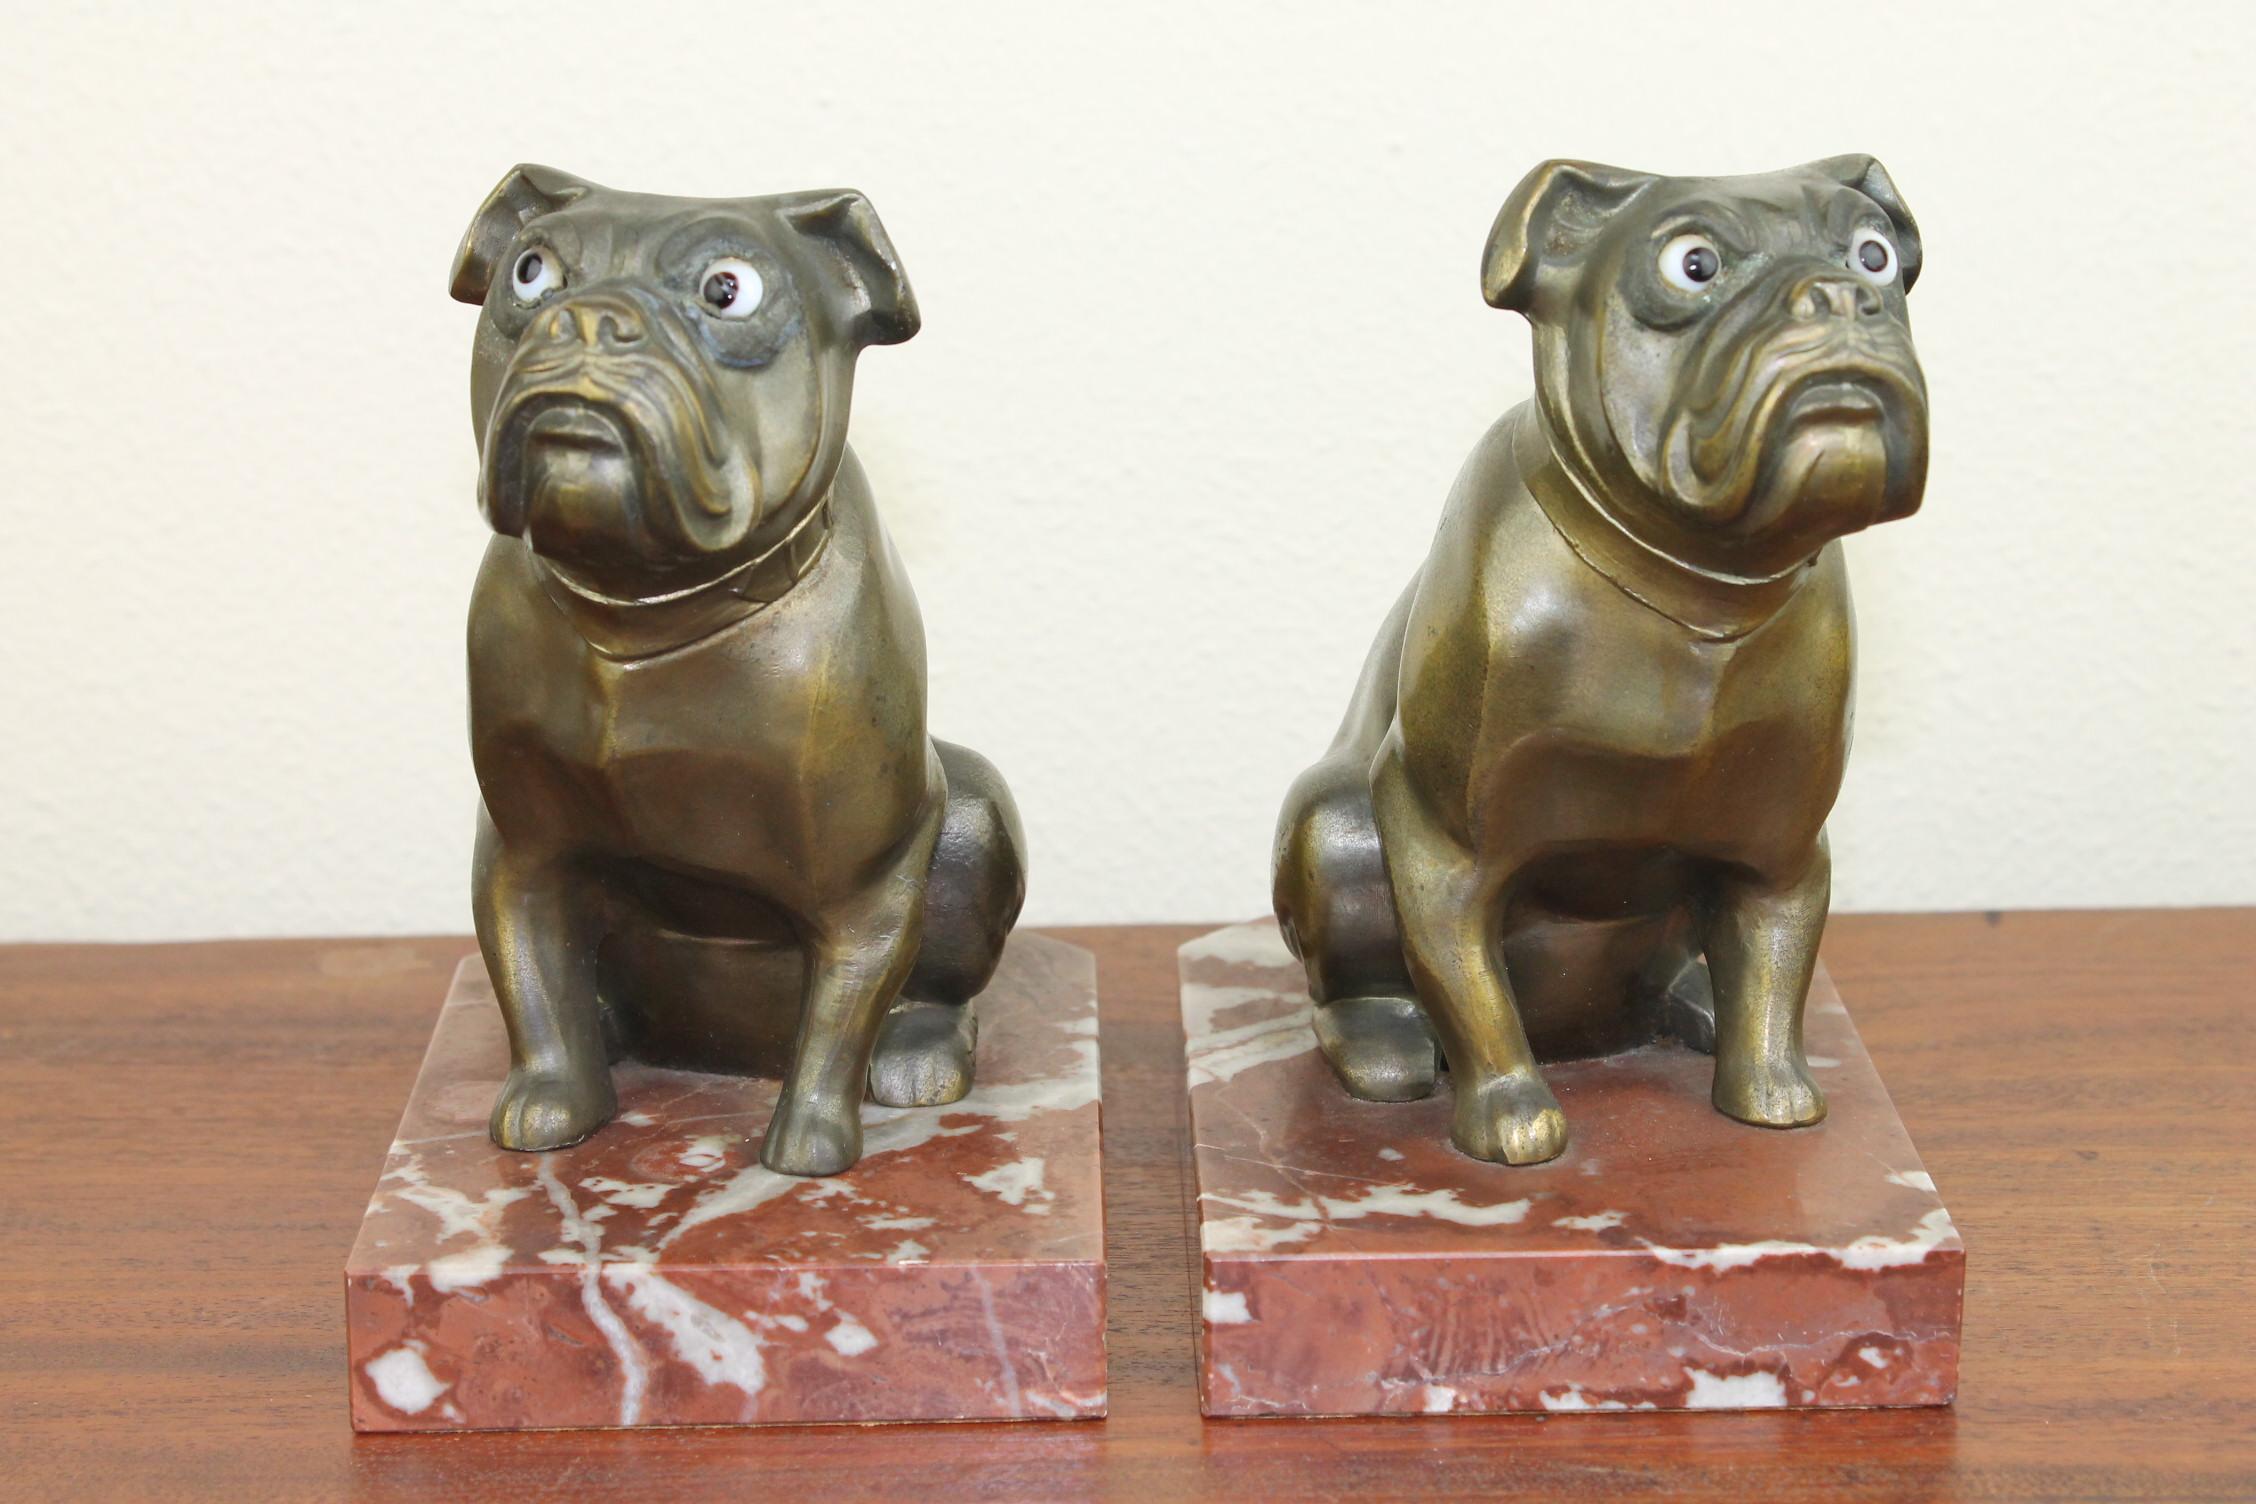 20th Century Art Deco Bulldog Bookends by Franjou, France